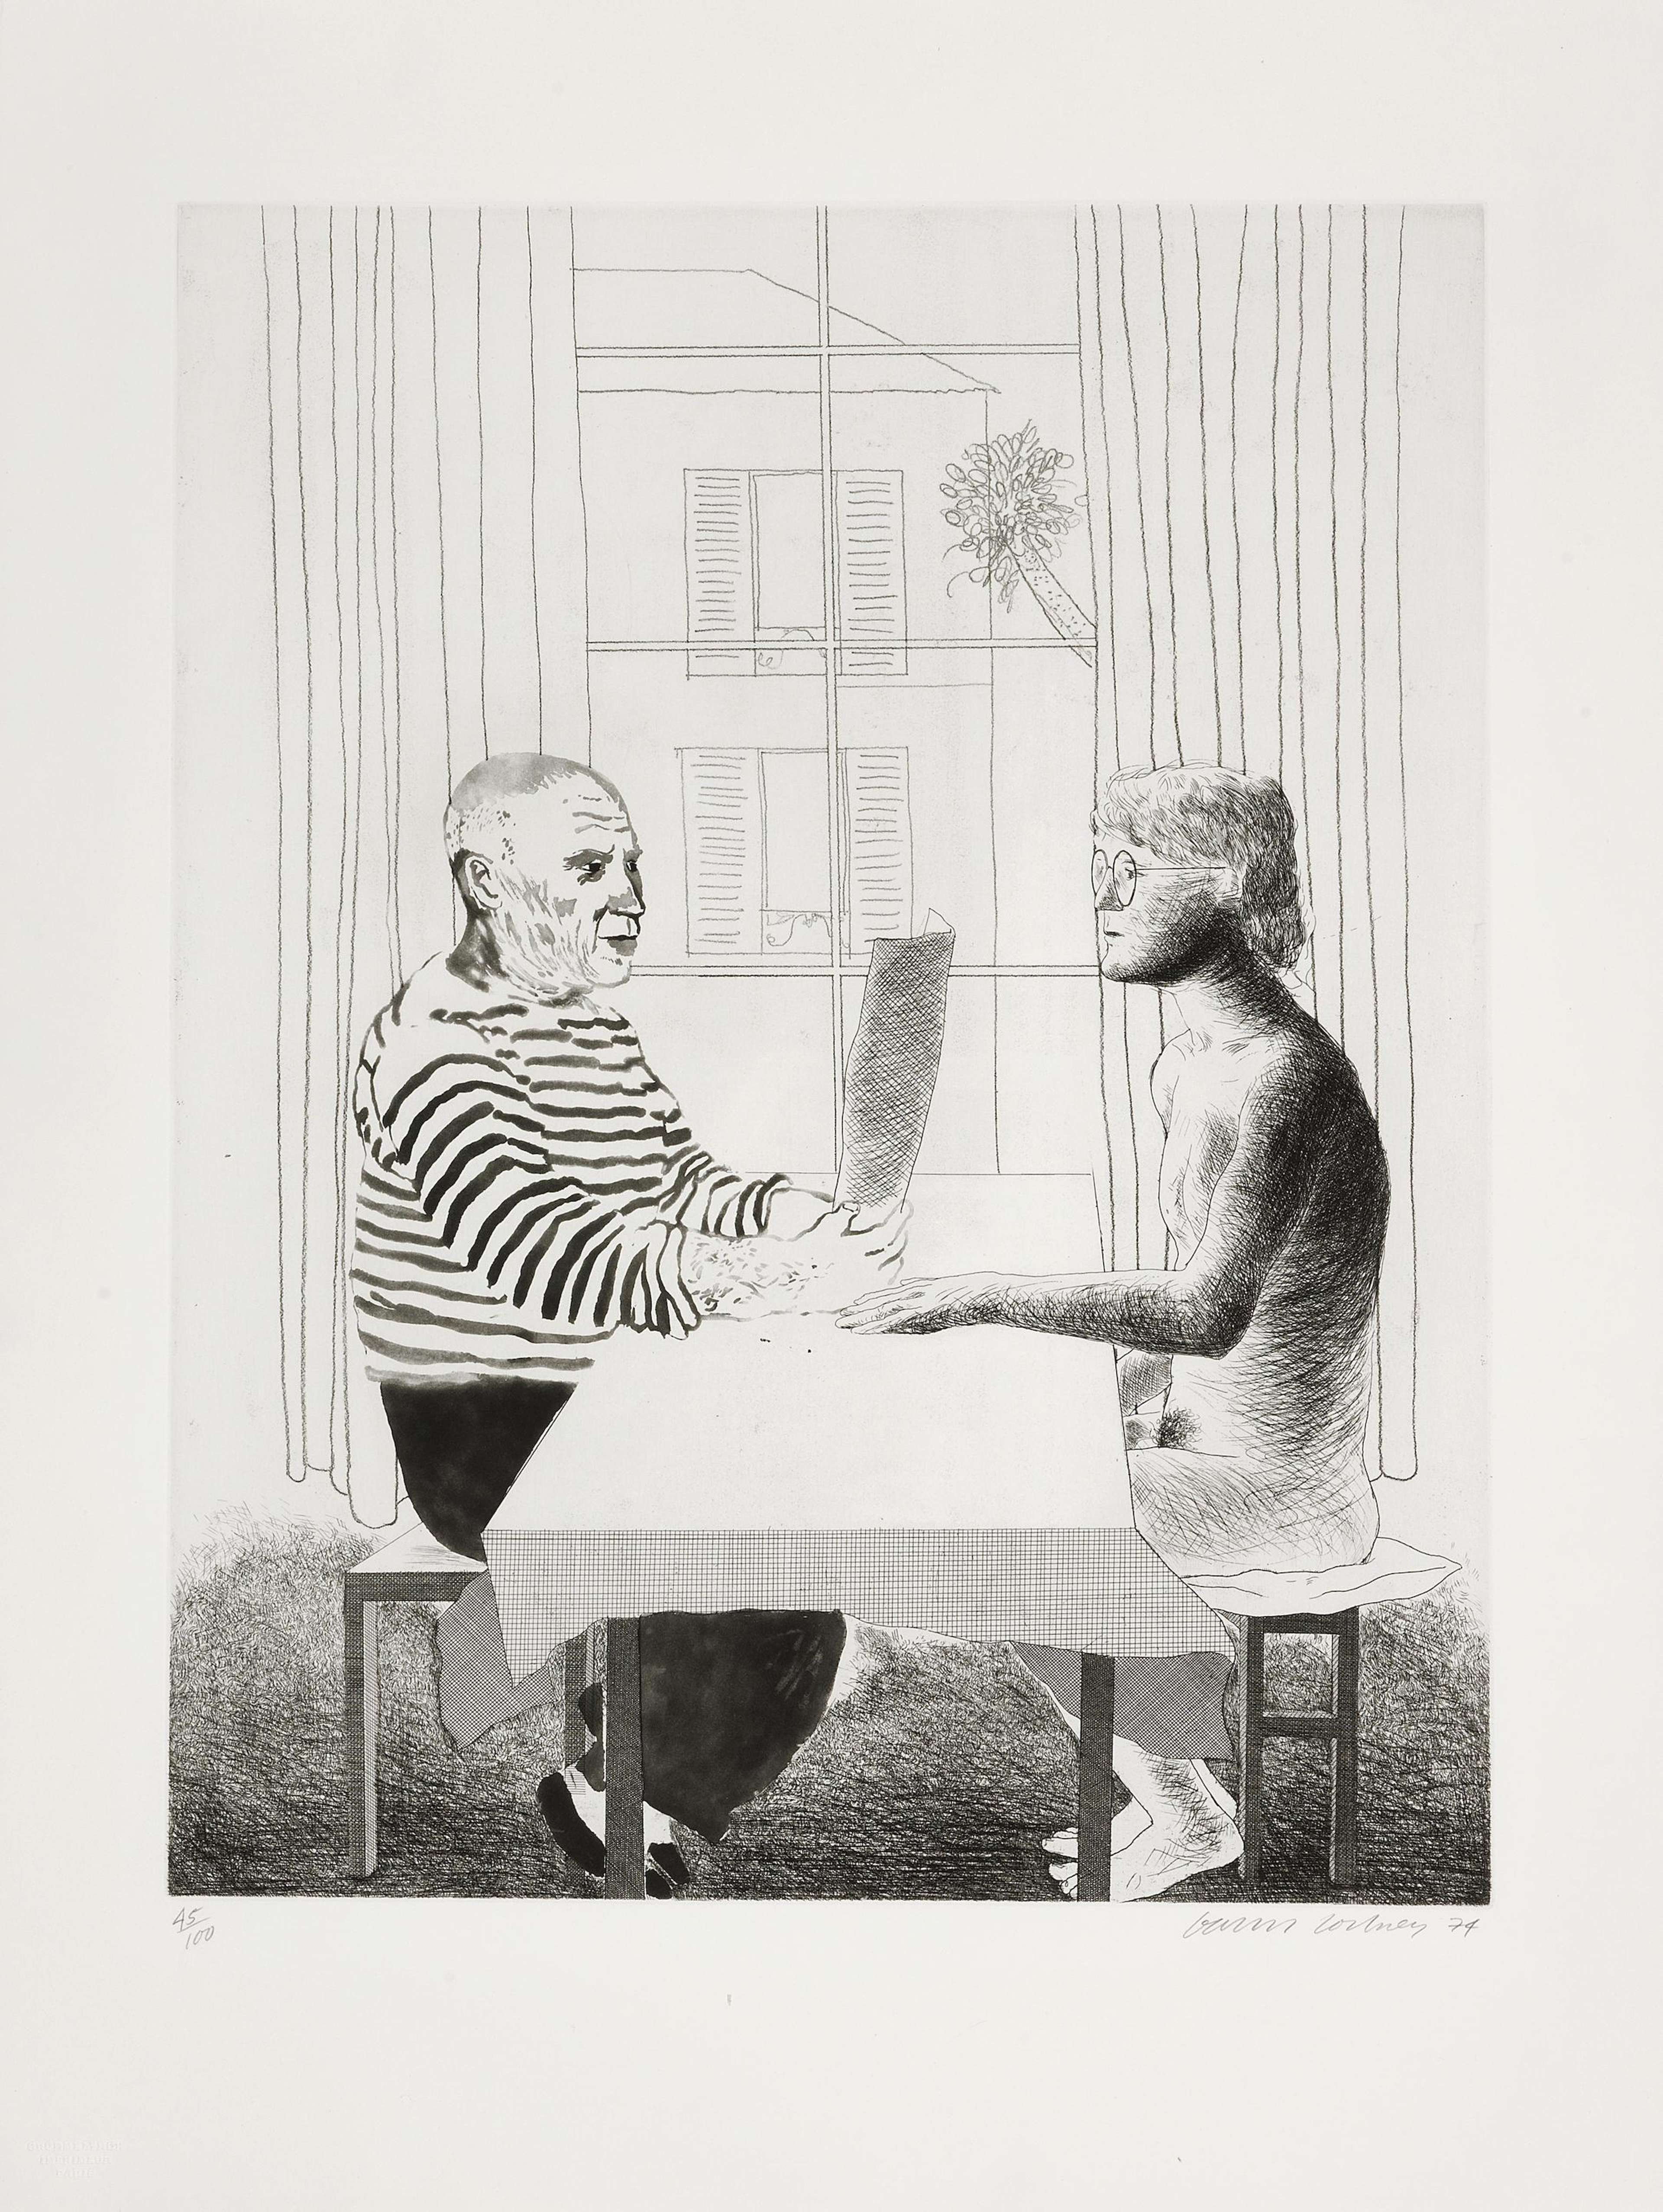 An etching which forms part of the Influences collection, it depicts the artist himself sat face-to-face with one of his greatest inspirations: Spanish artist Pablo Picasso.